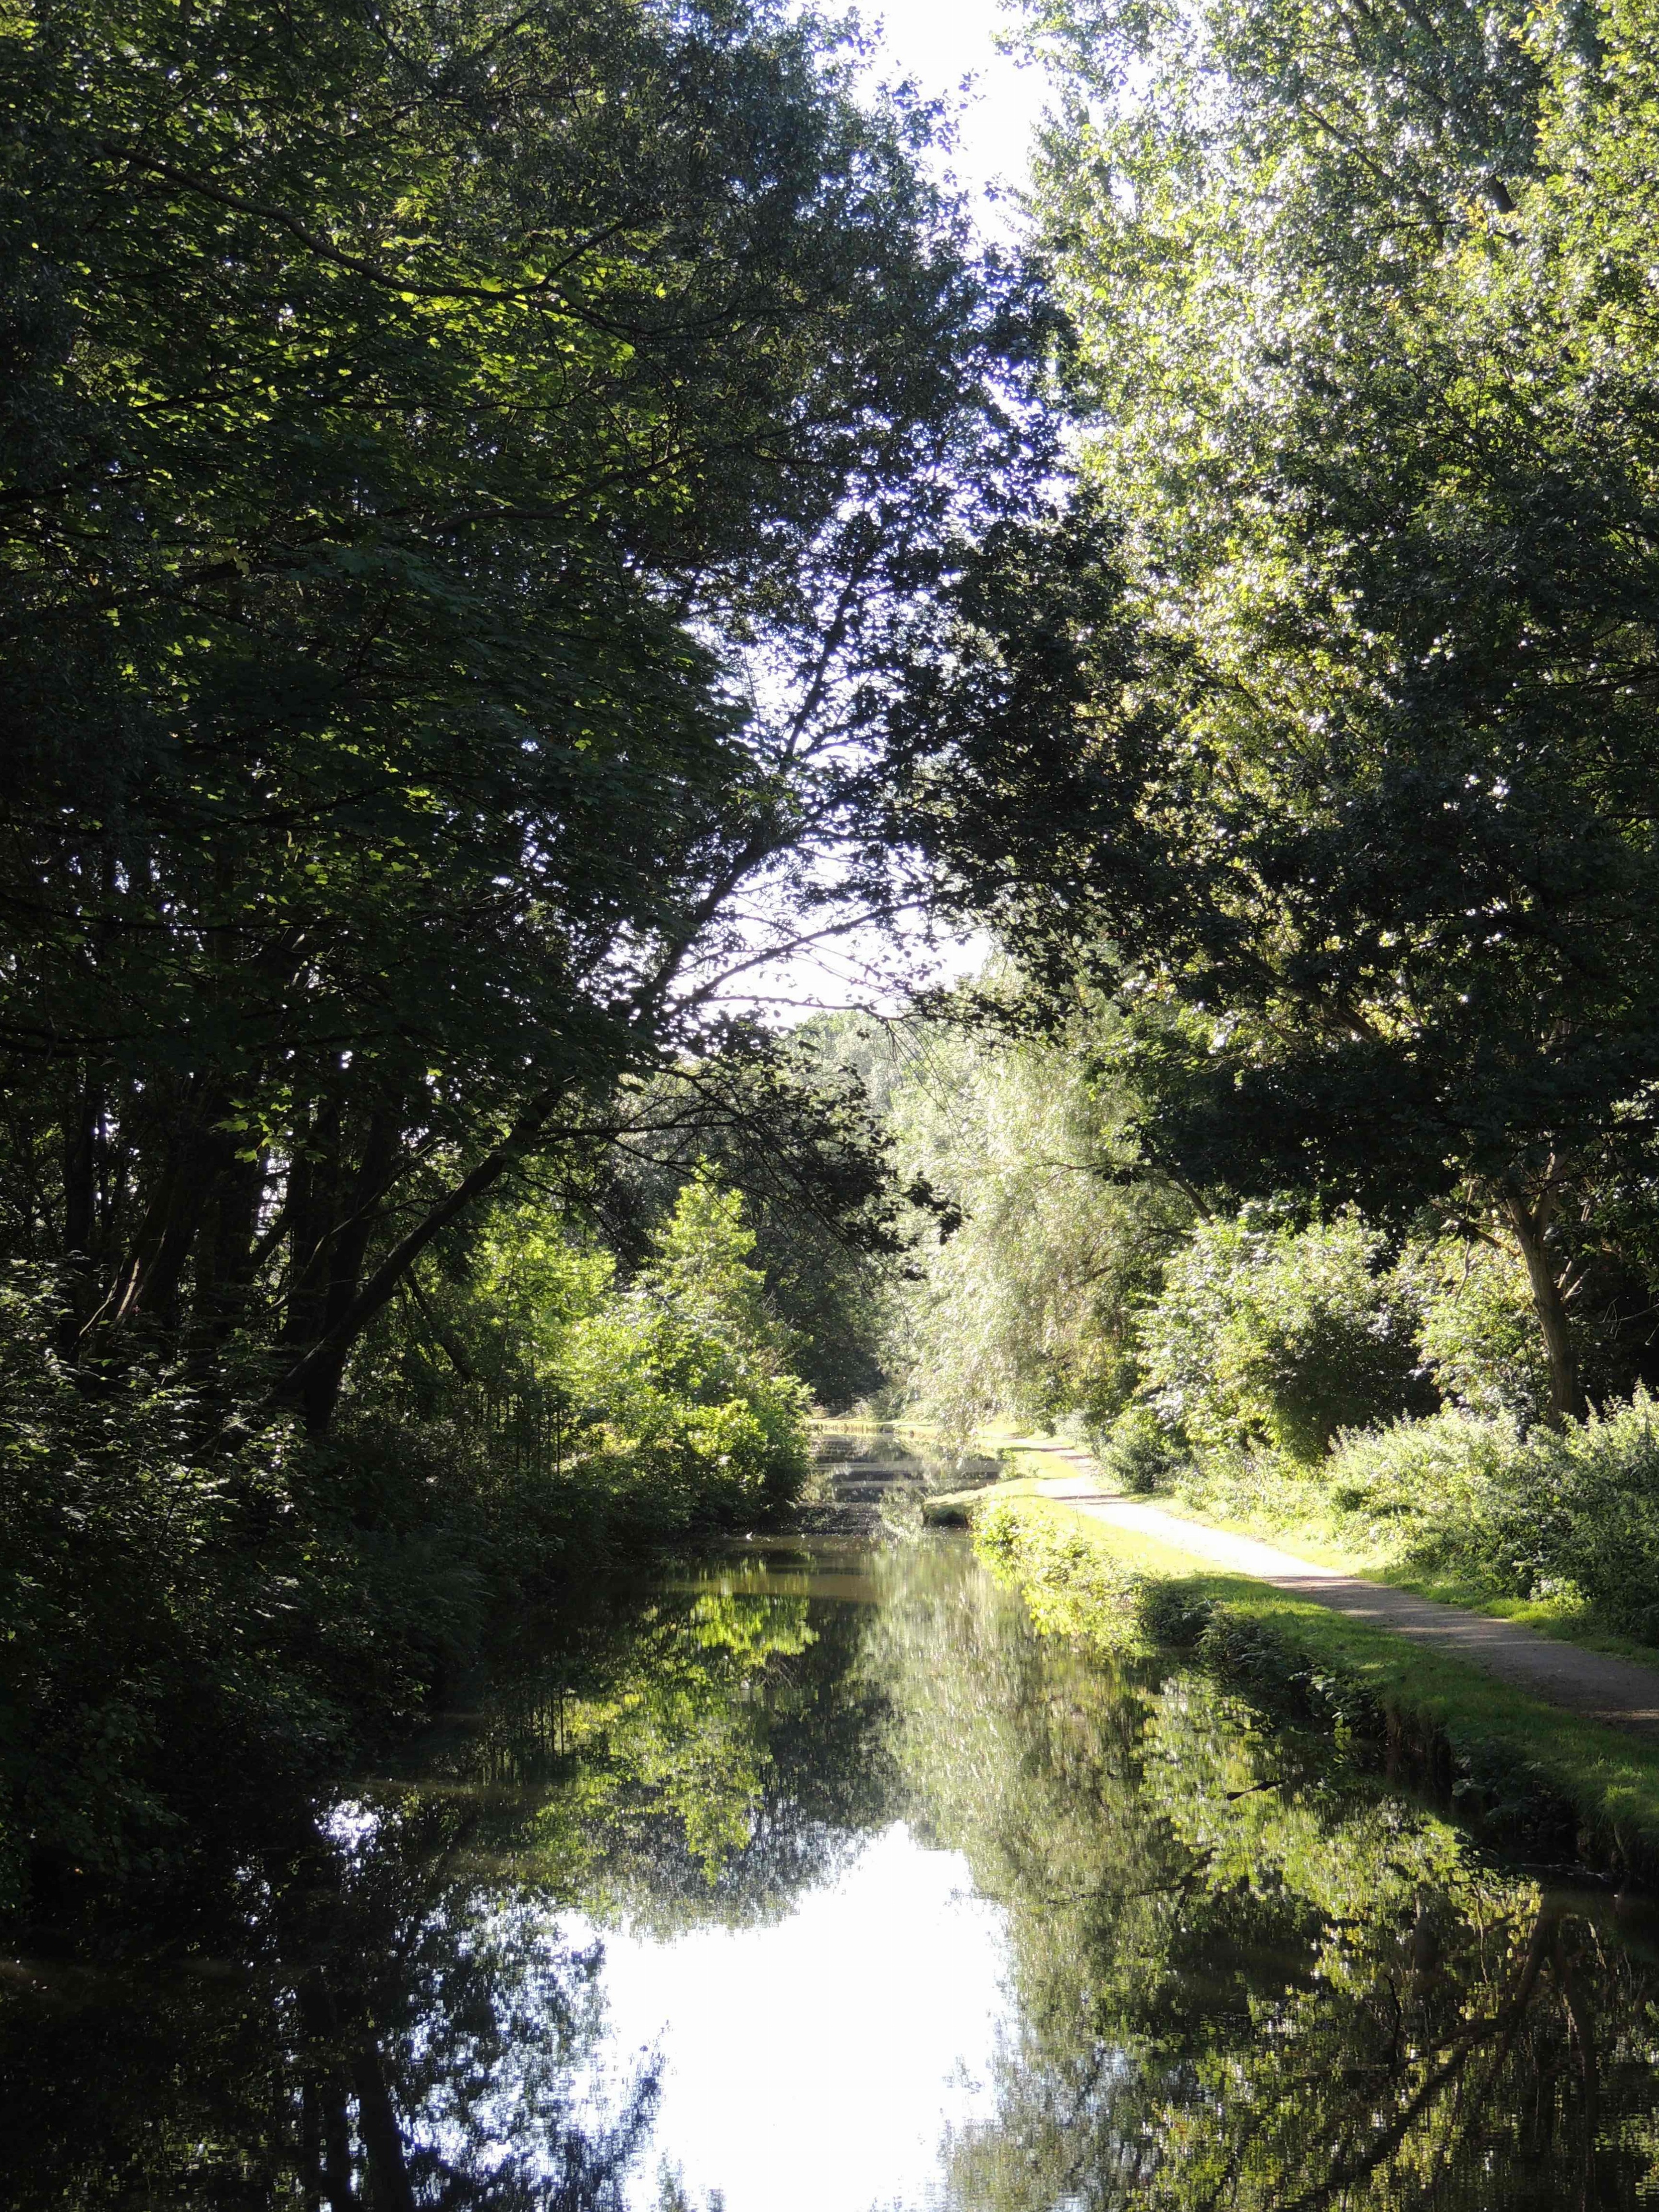 Peak Forest canal, leafy tunnel on a perfect day